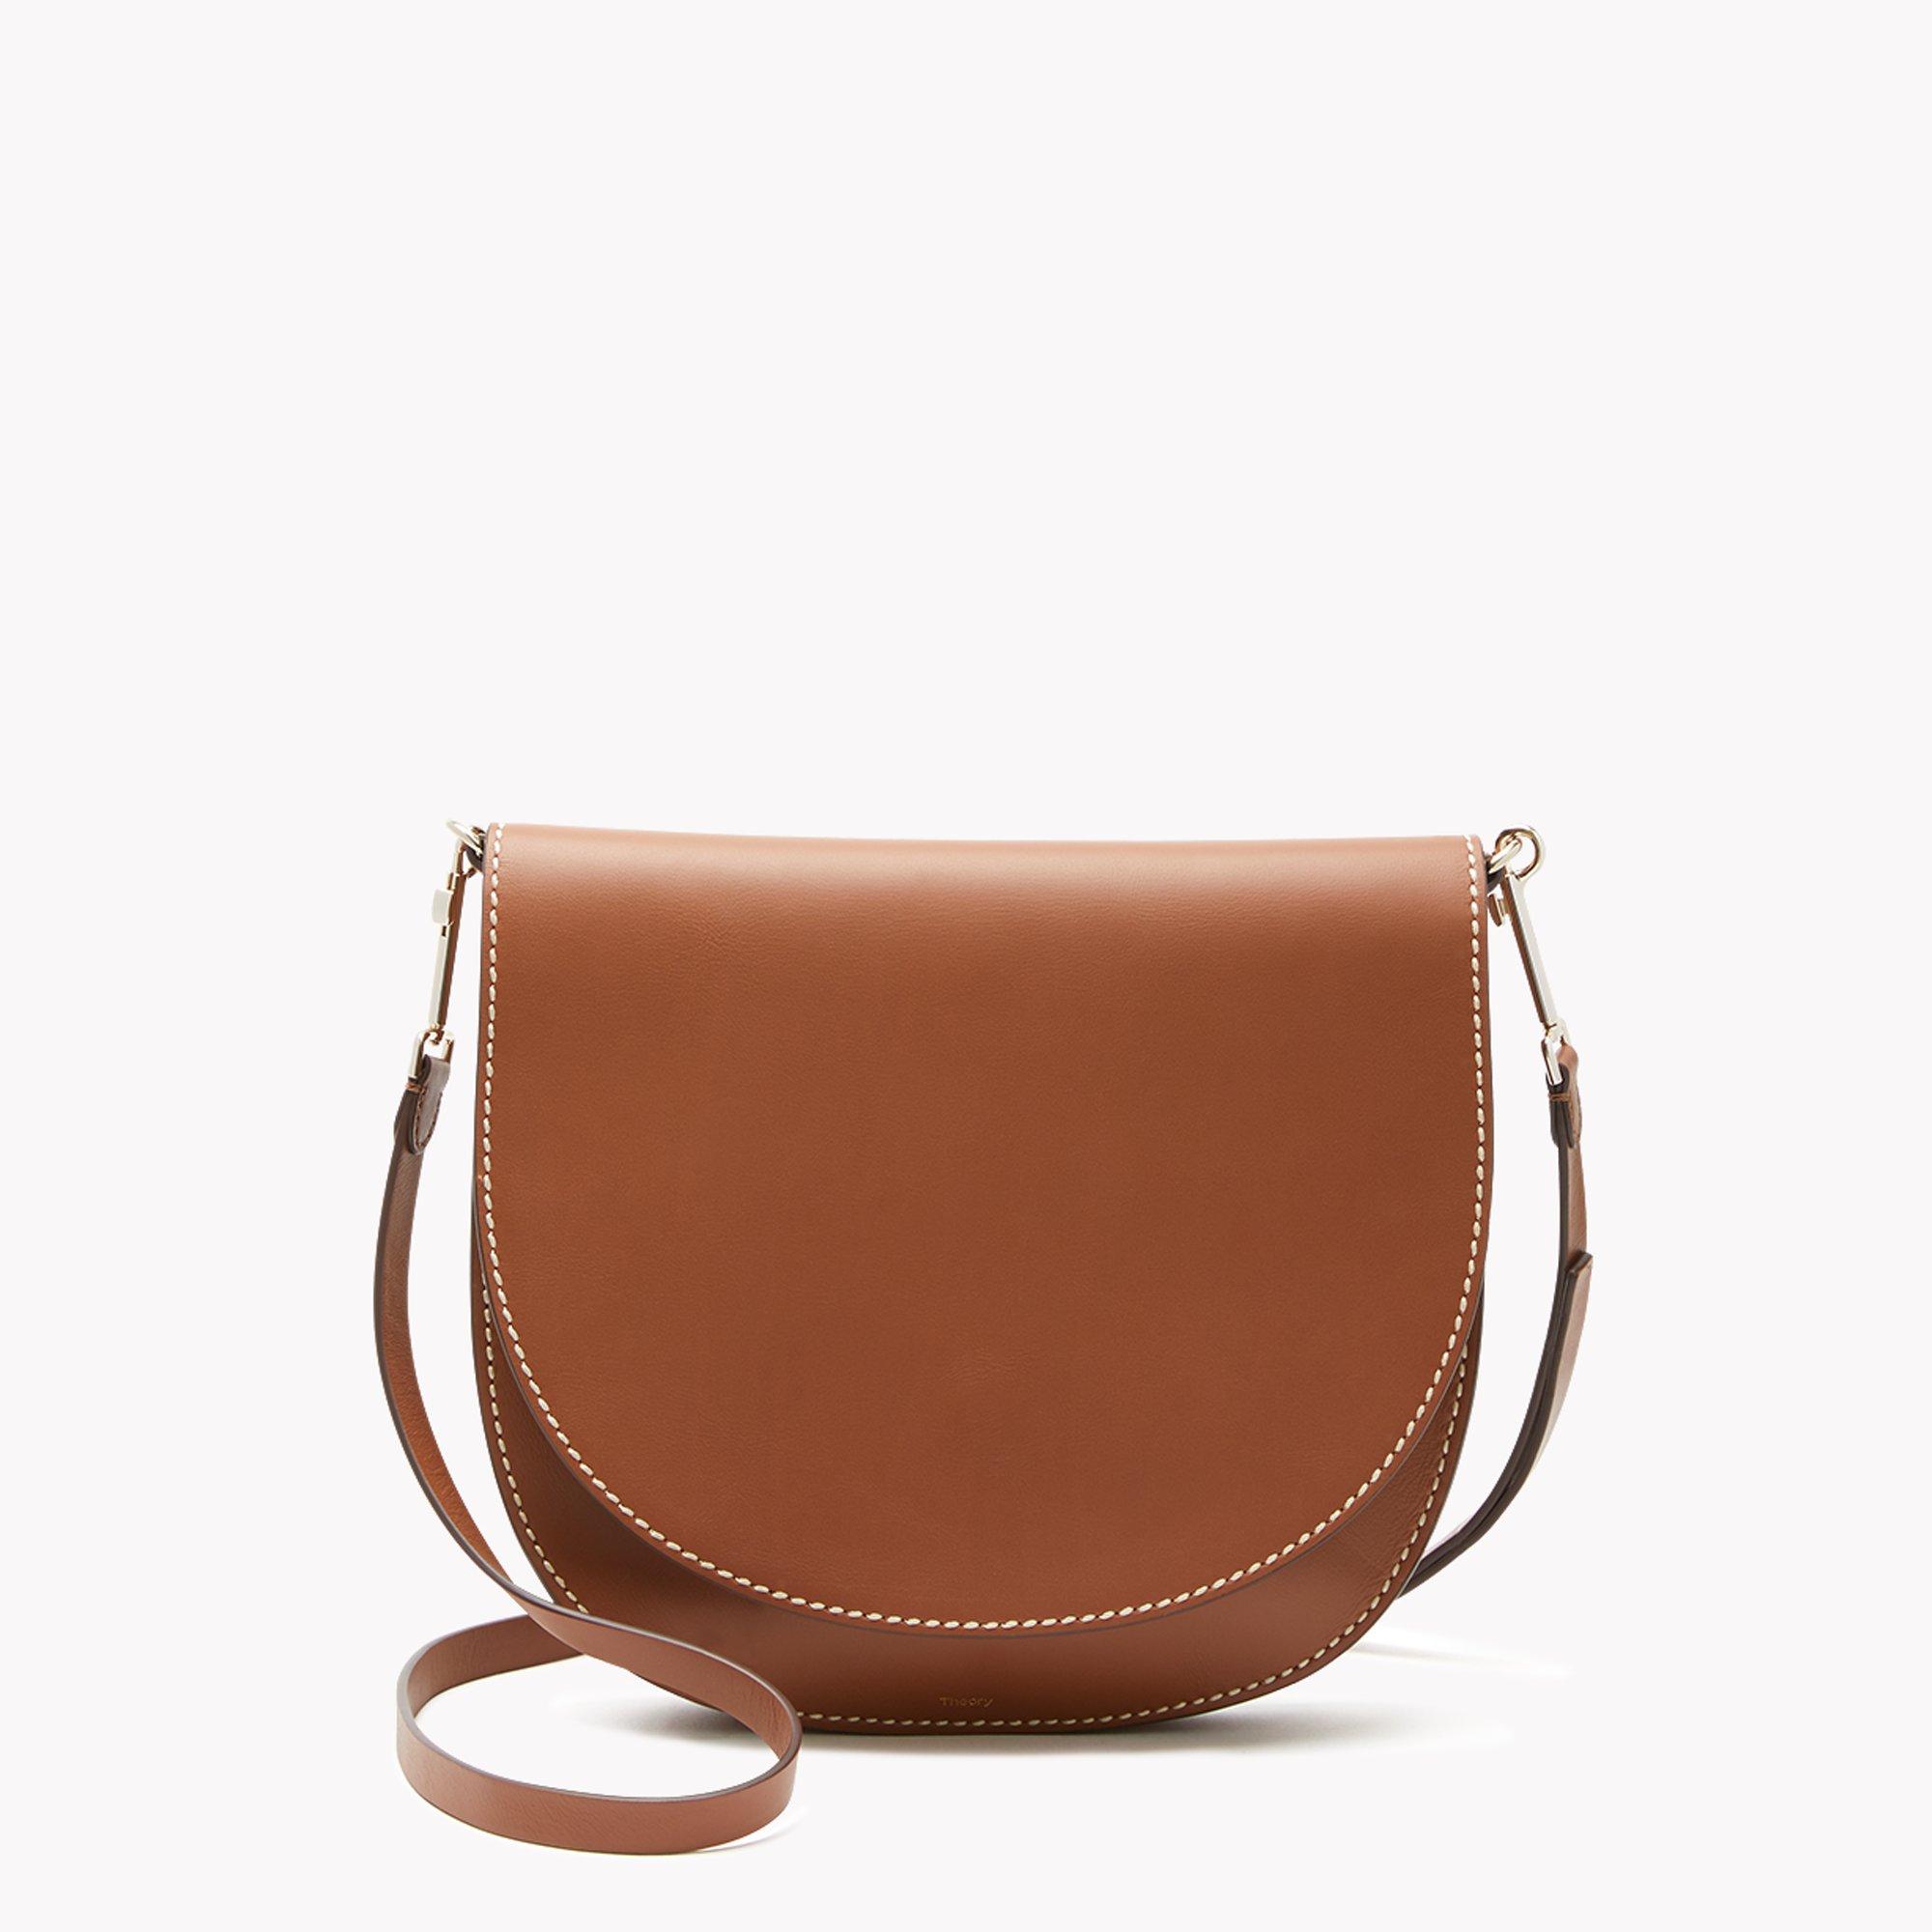 Theory Official Site | Women's Accessories